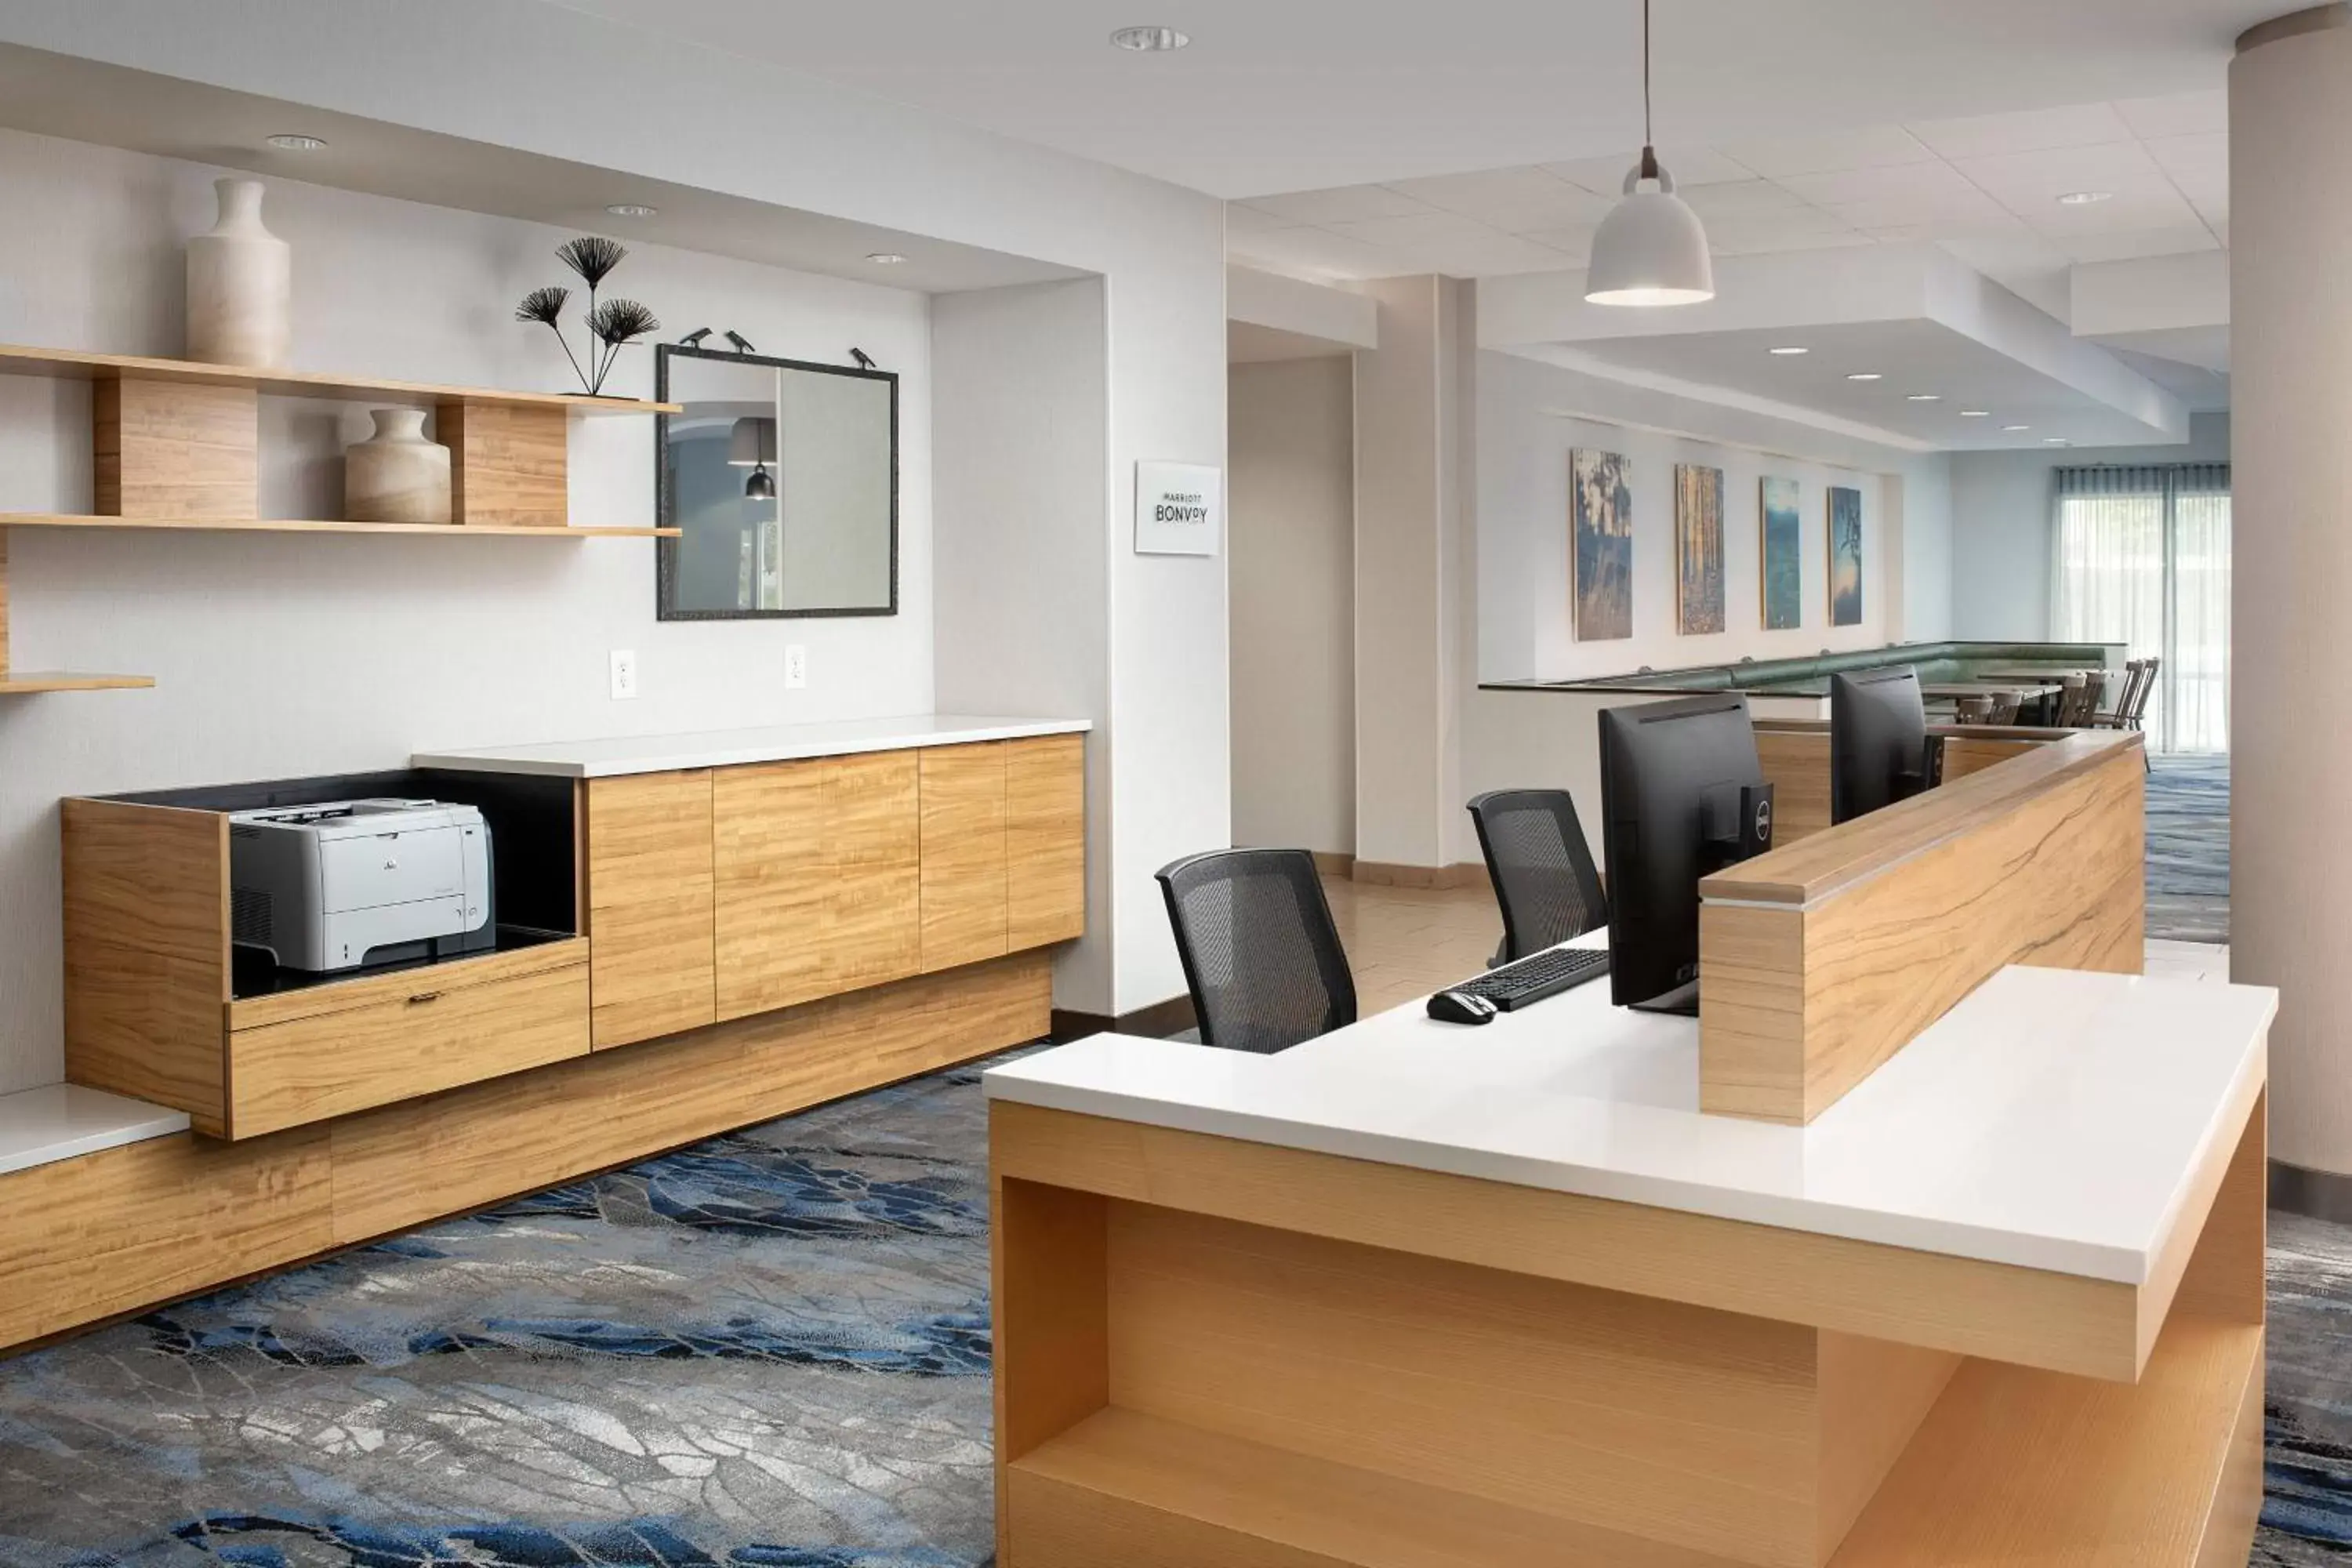 Business facilities in Fairfield Inn & Suites Baltimore BWI Airport